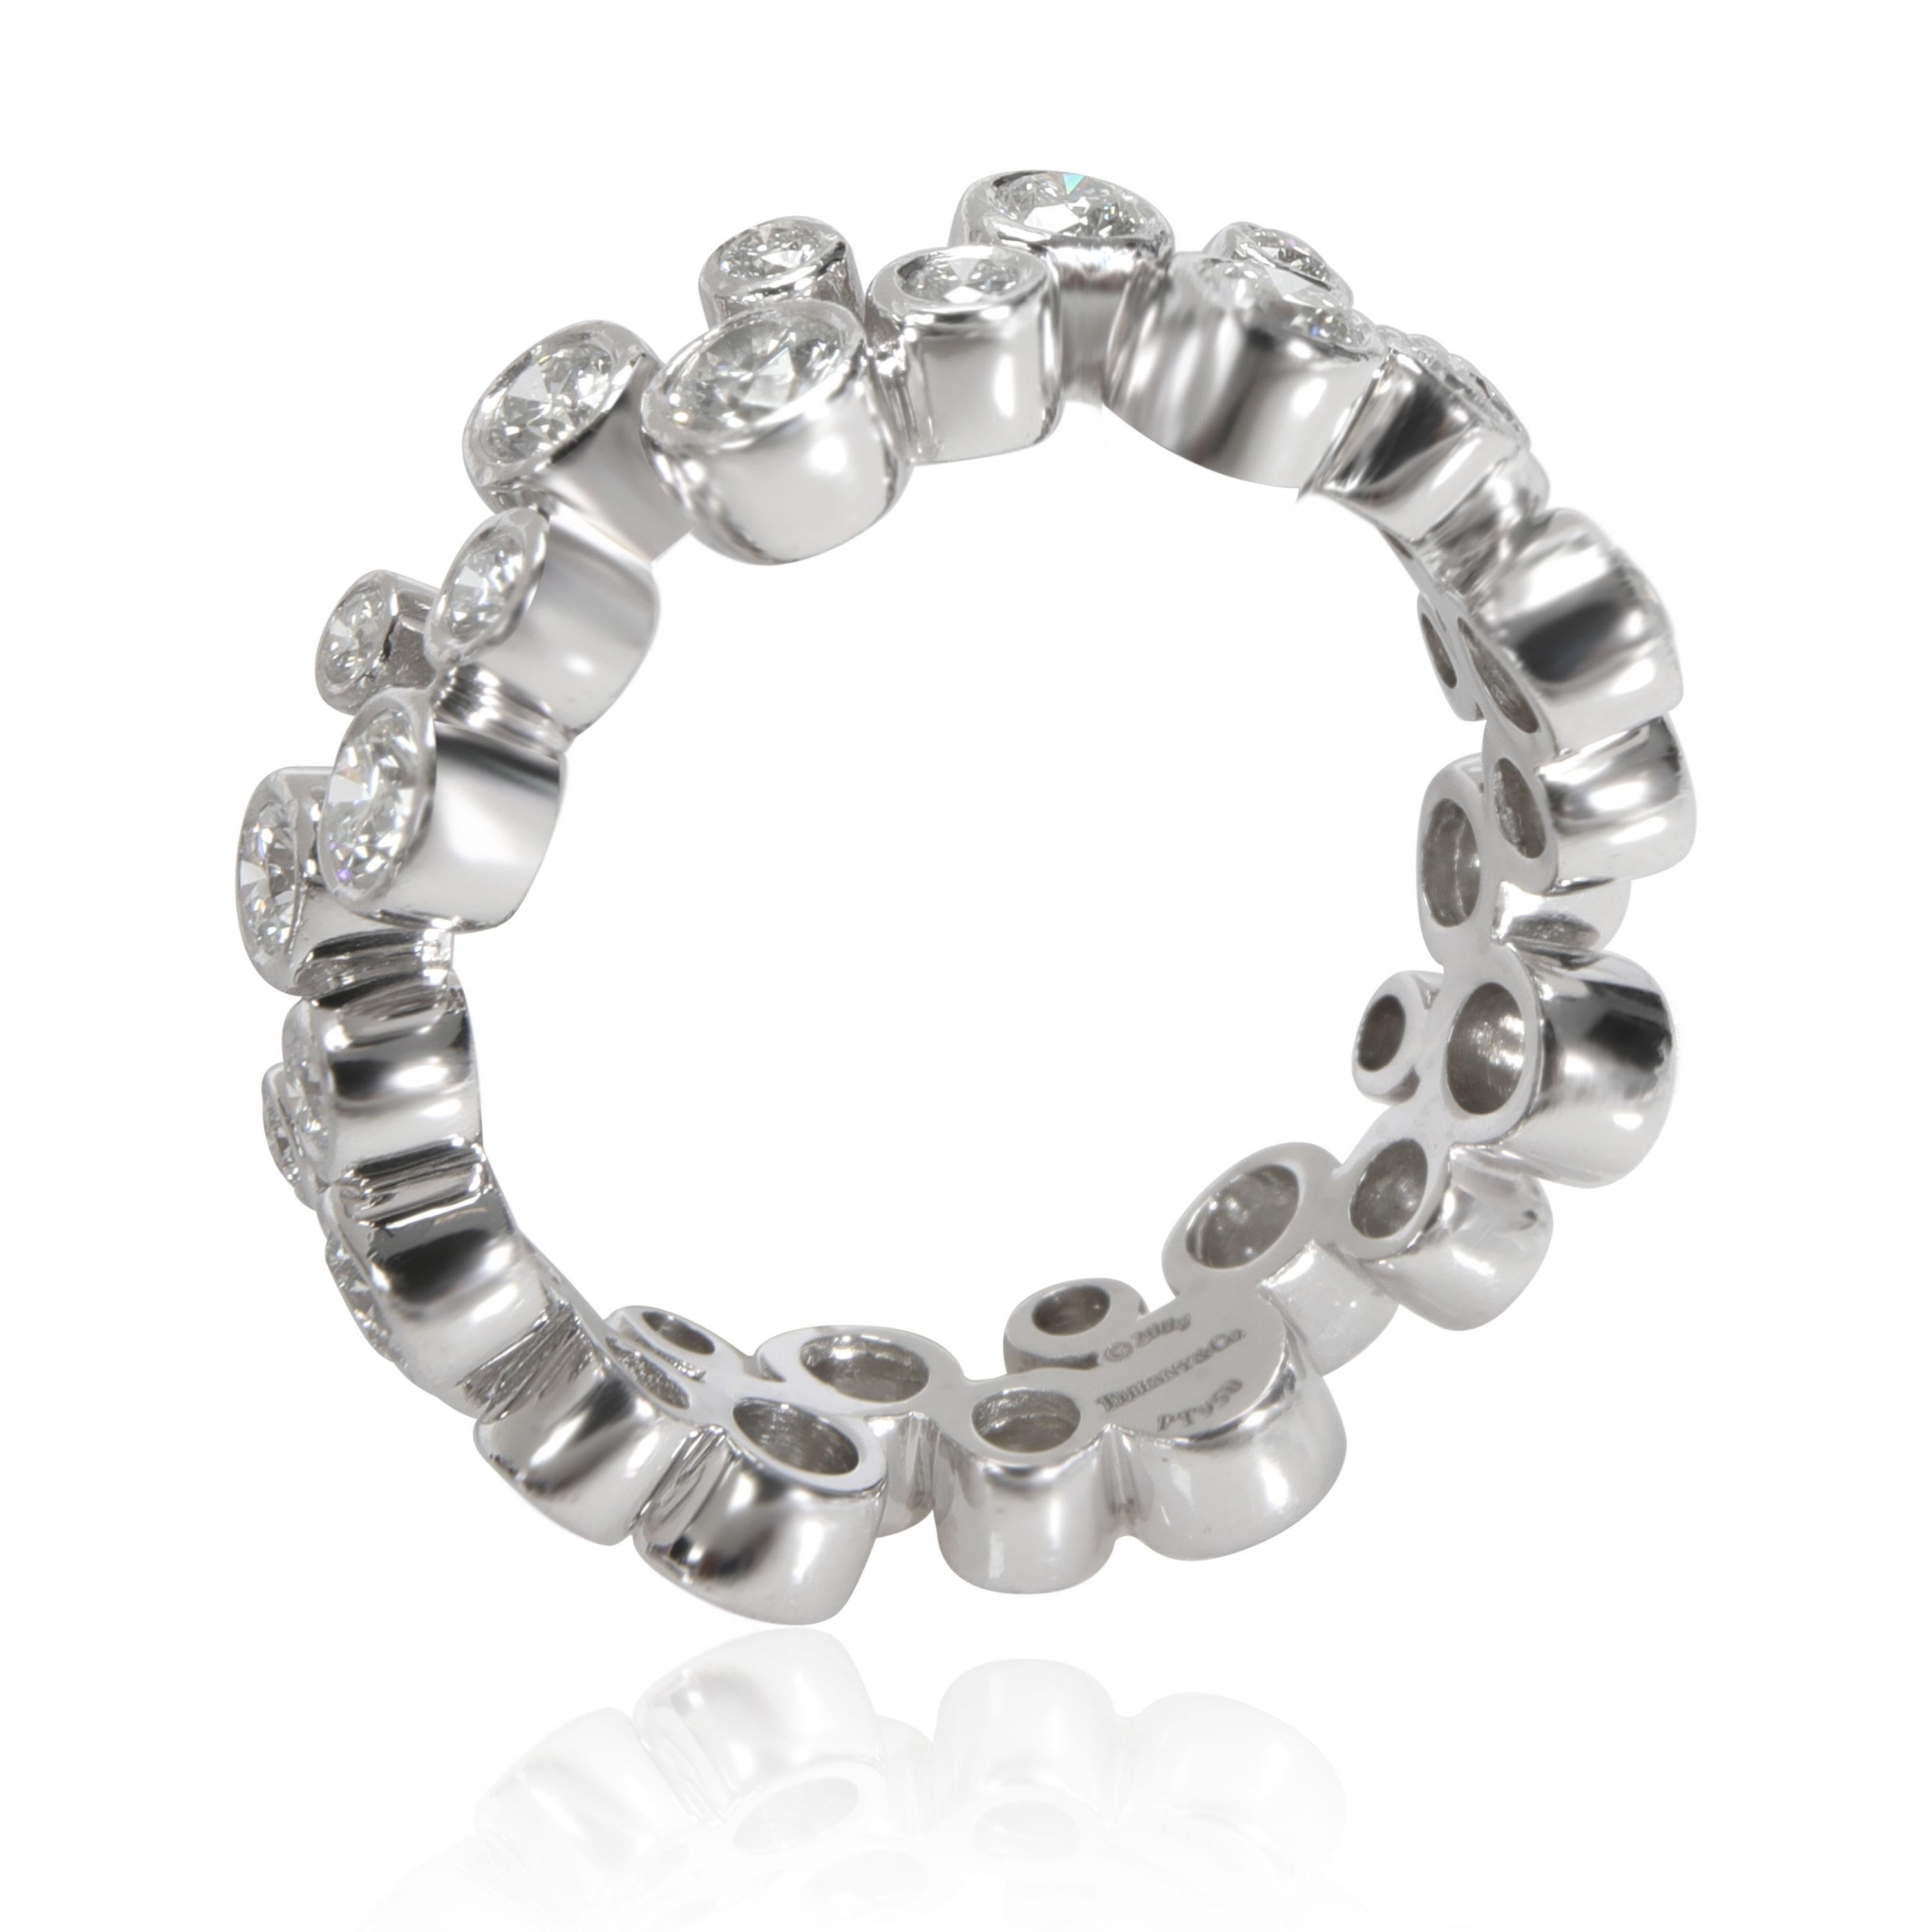 TTiffany & Co. Bubbles Diamond Eternity Band in Platinum 0.96 CTW

PRIMARY DETAILS
SKU: 110895
Listing Title: Tiffany & Co. Bubbles Diamond Eternity Band in Platinum 0.96 CTW
Condition Description: Retails for 7800 USD. In excellent condition and